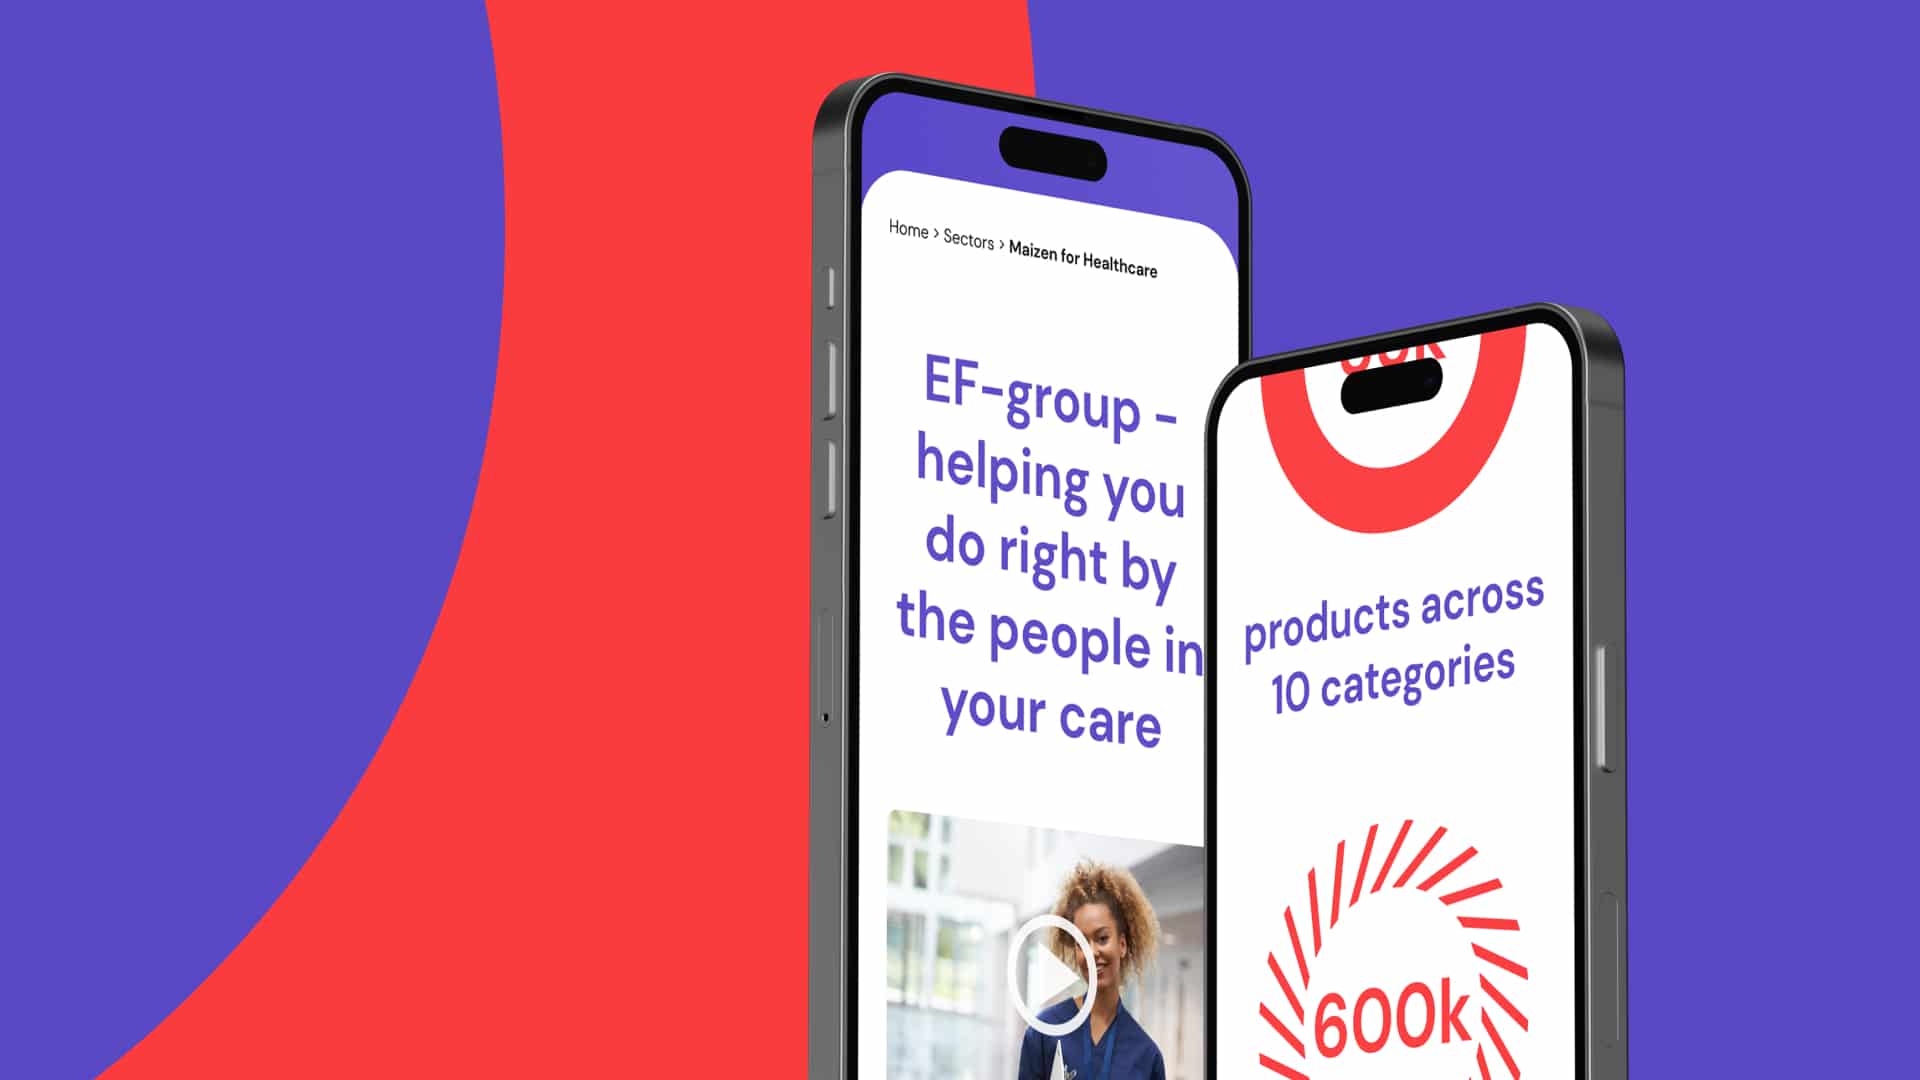 Two Smartphones with the EF Group website loaded on them, in front of a purple and red background.